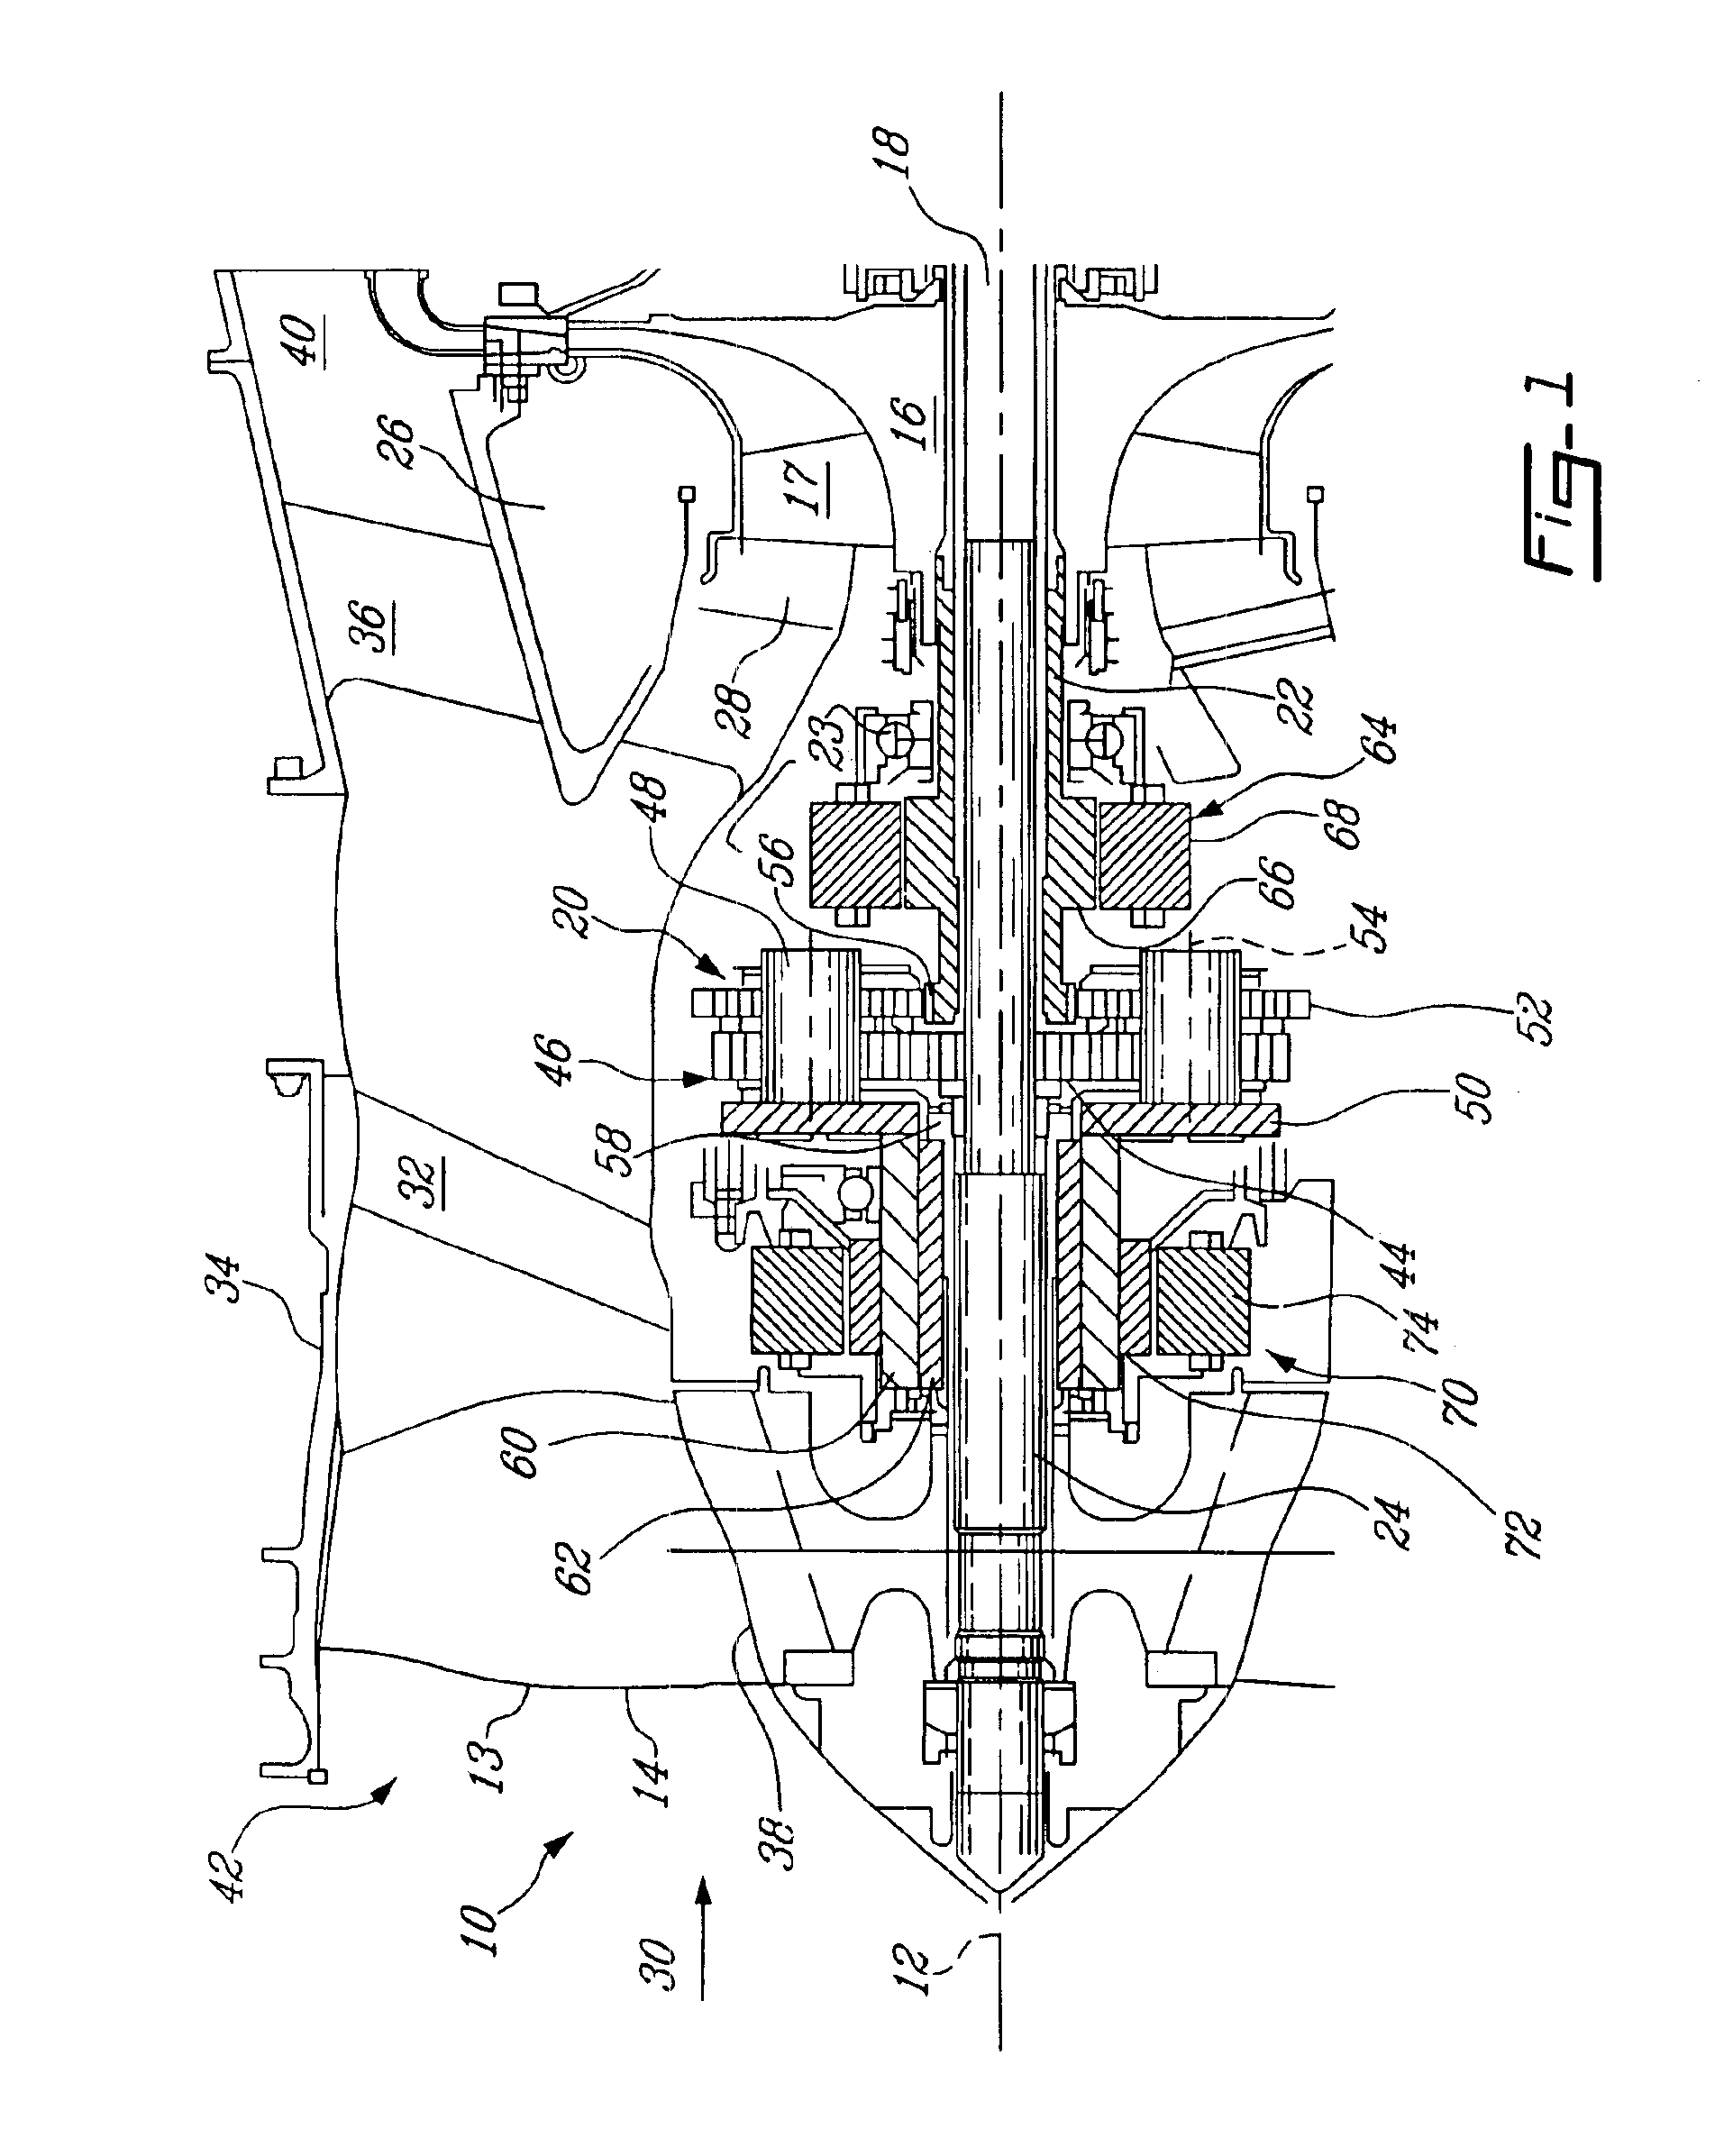 Differential geared turbine engine with torque modulation capability